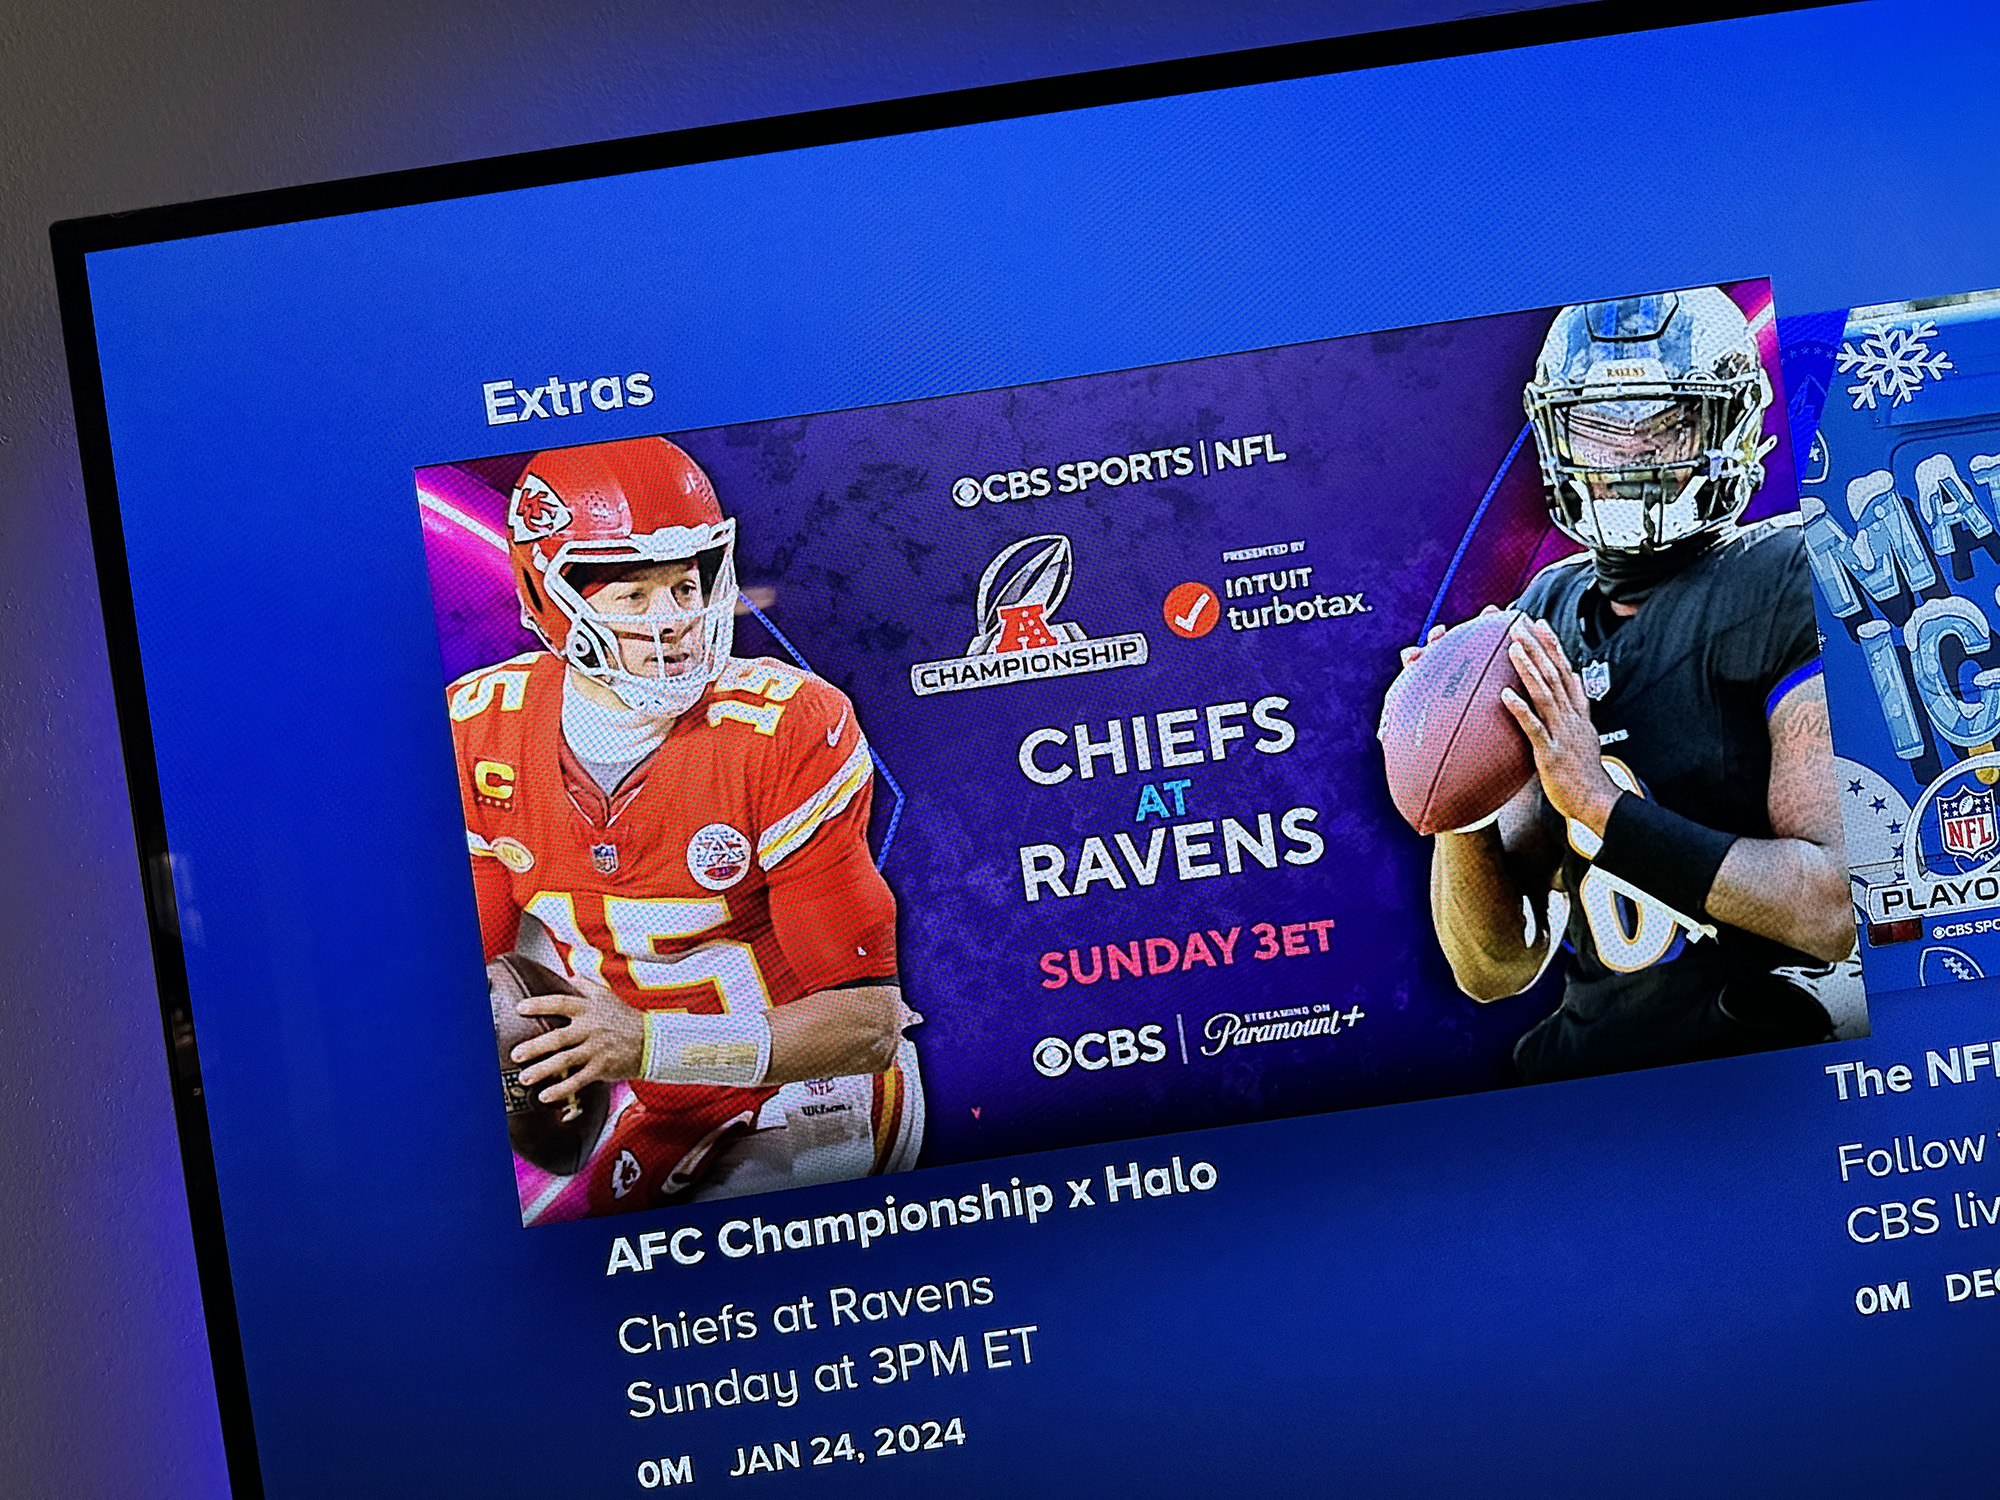 A promo image for the AFC Championship game on Paramount Plus.